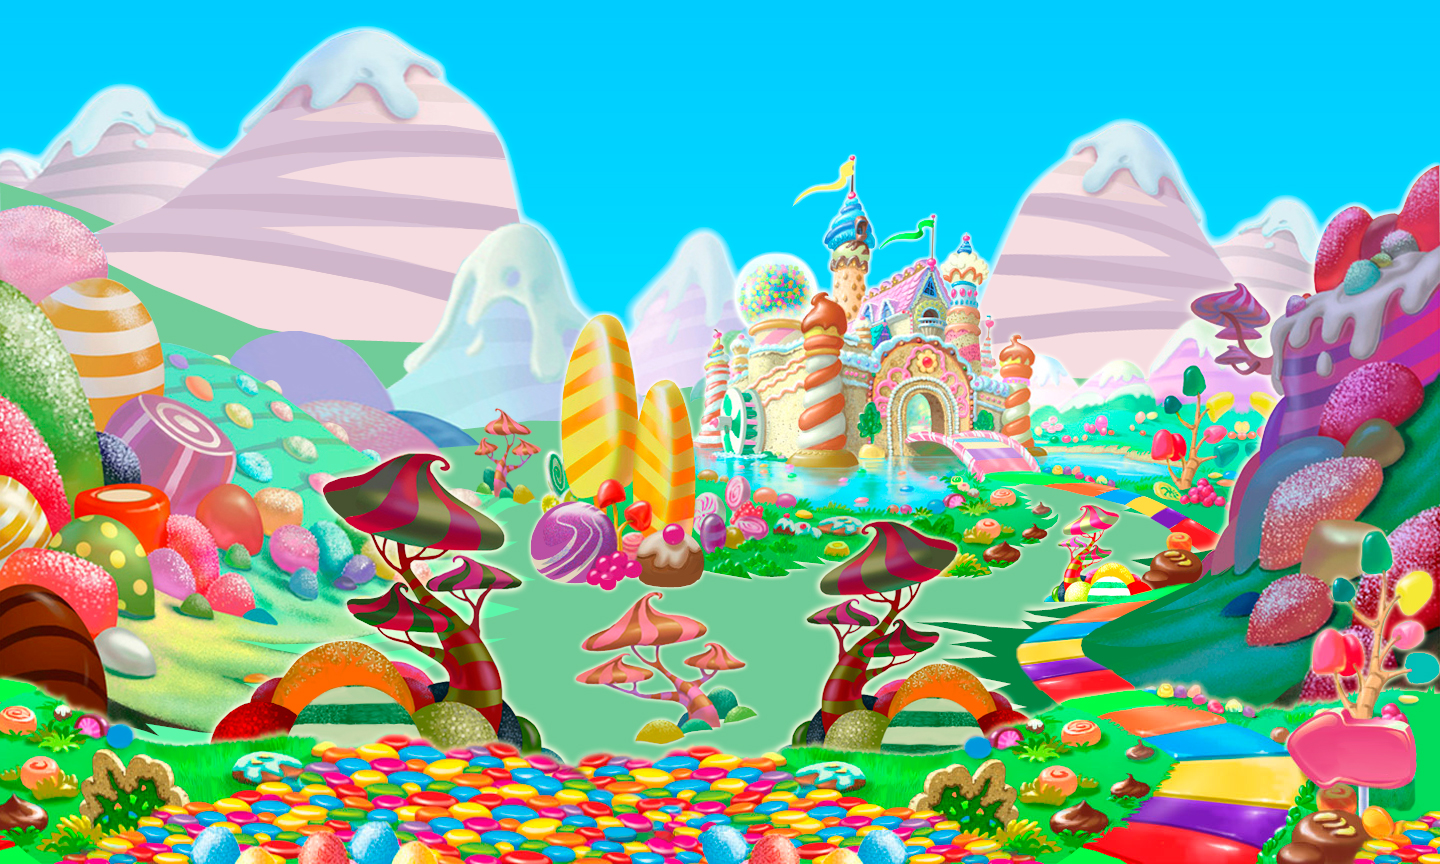 Peppermint Forest Candyland